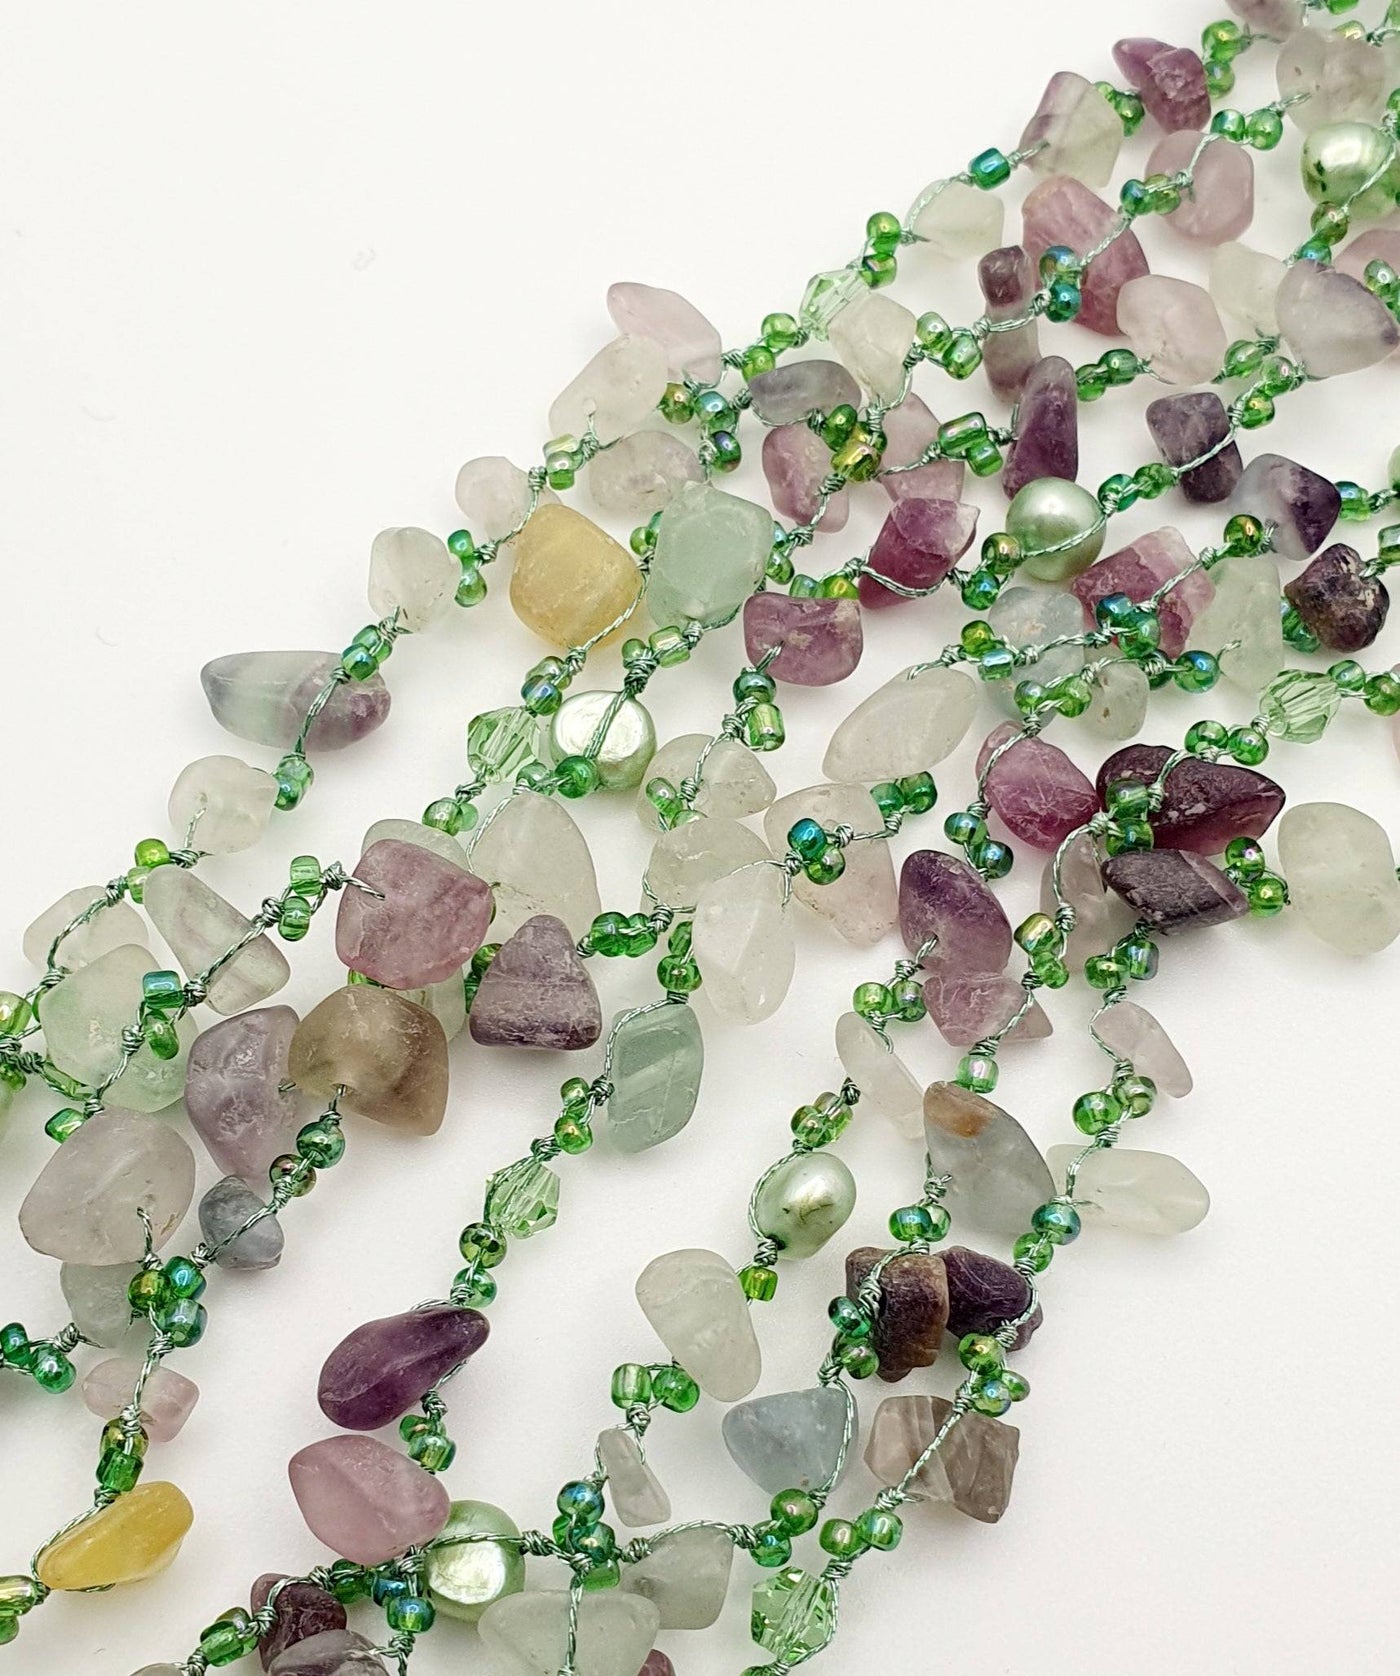 Japanese Silk Cord Necklace With Dyed Freshwater Pearl & Fluorite 155cm